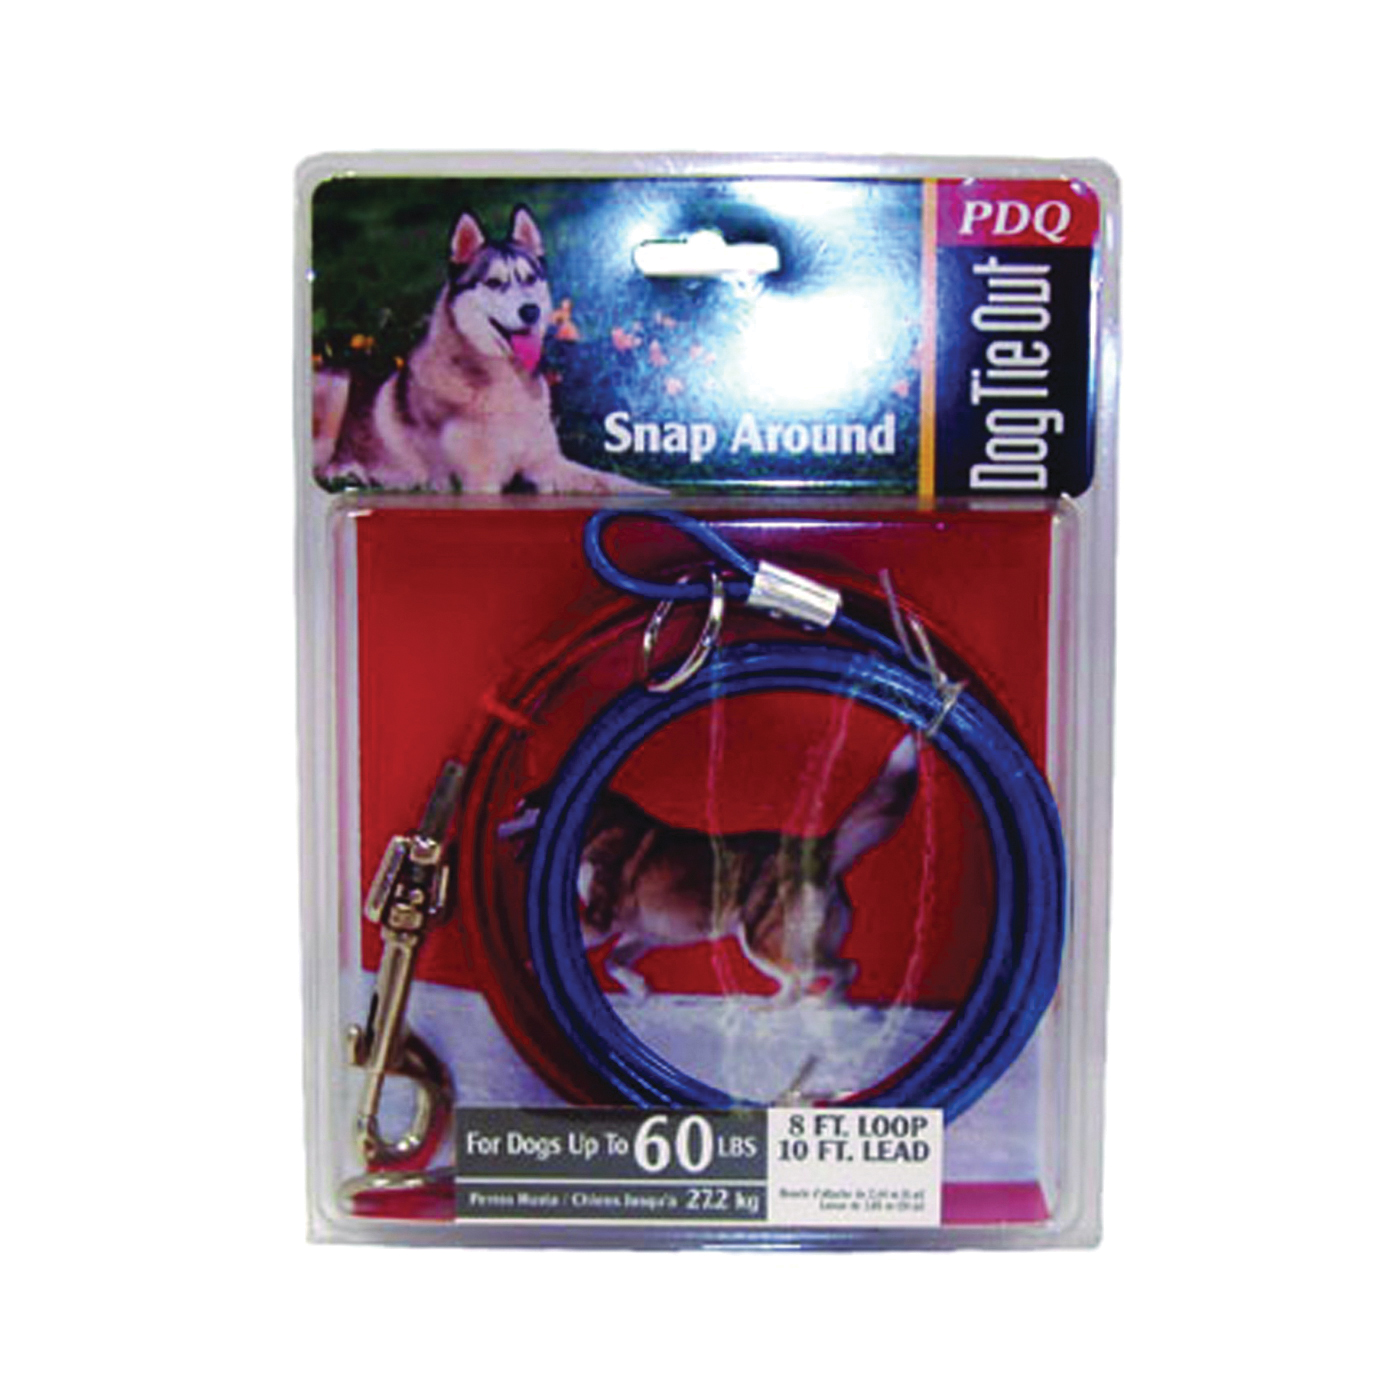 PDQ Q251500099 Pet Tie-Out Belt, 10 ft L Belt/Cable, For: Large Dogs up to 60 lb